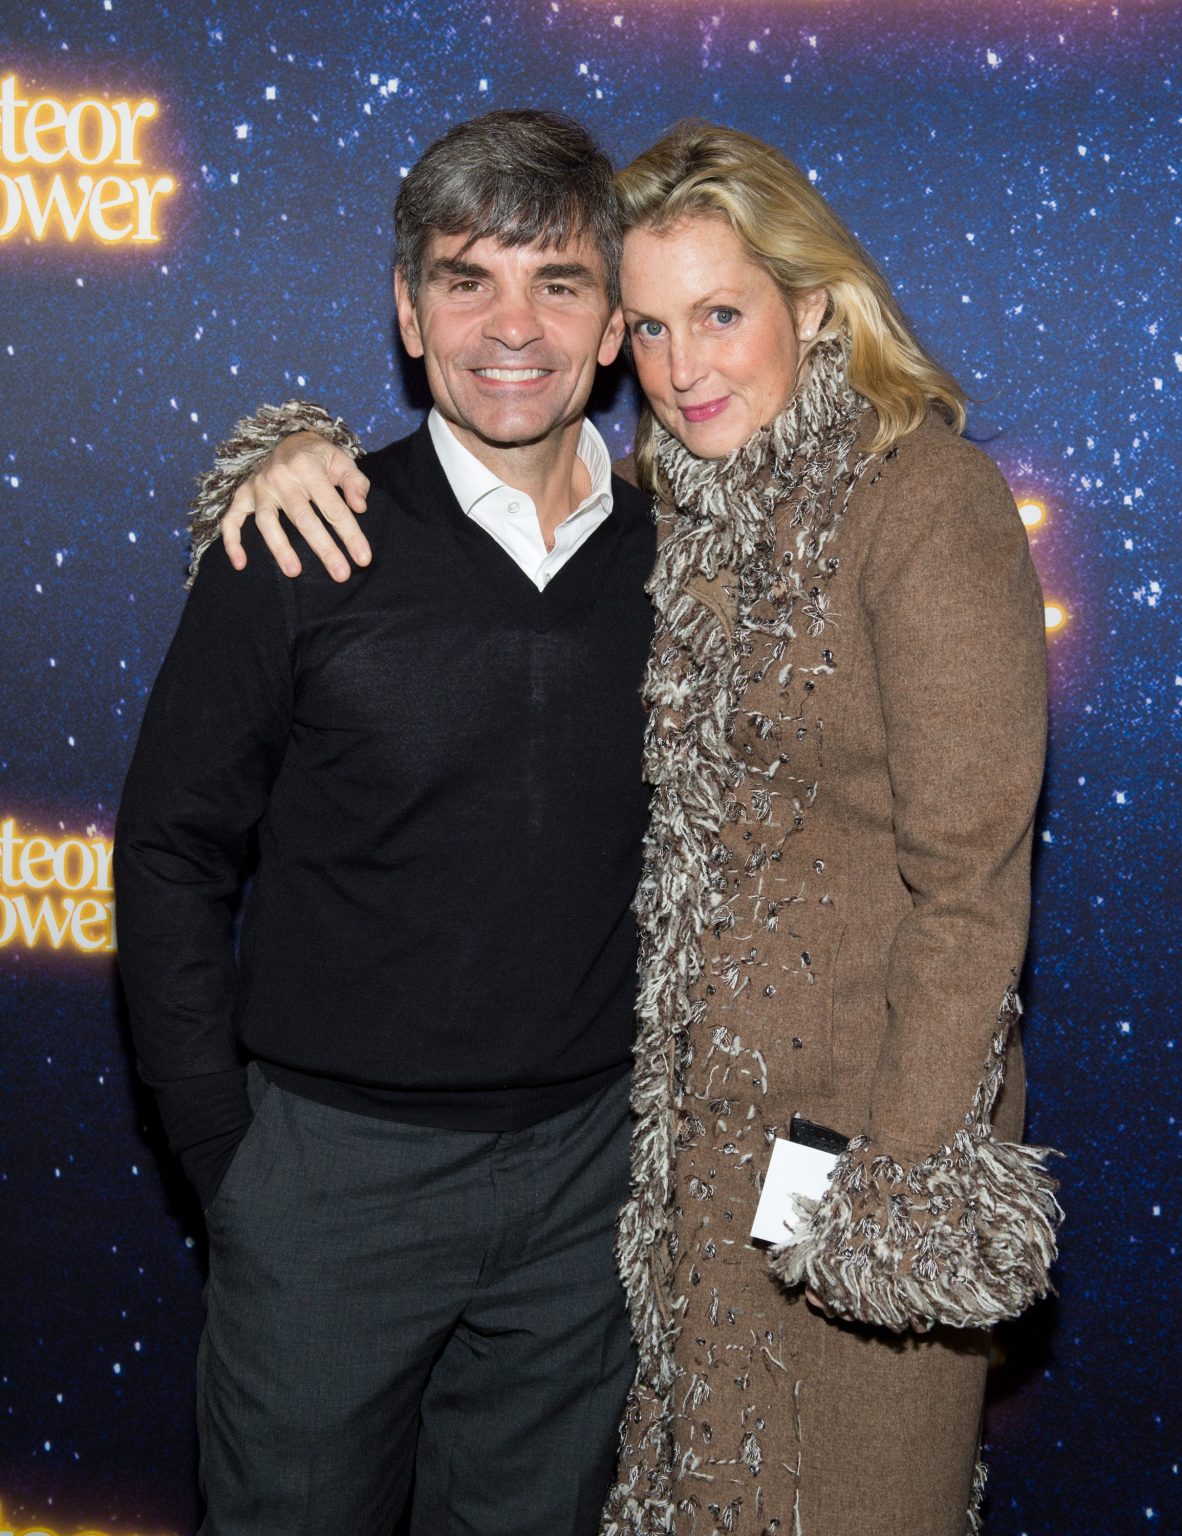 Stephanopoulos’ wife Ali Wentworth tests positive for COVID19